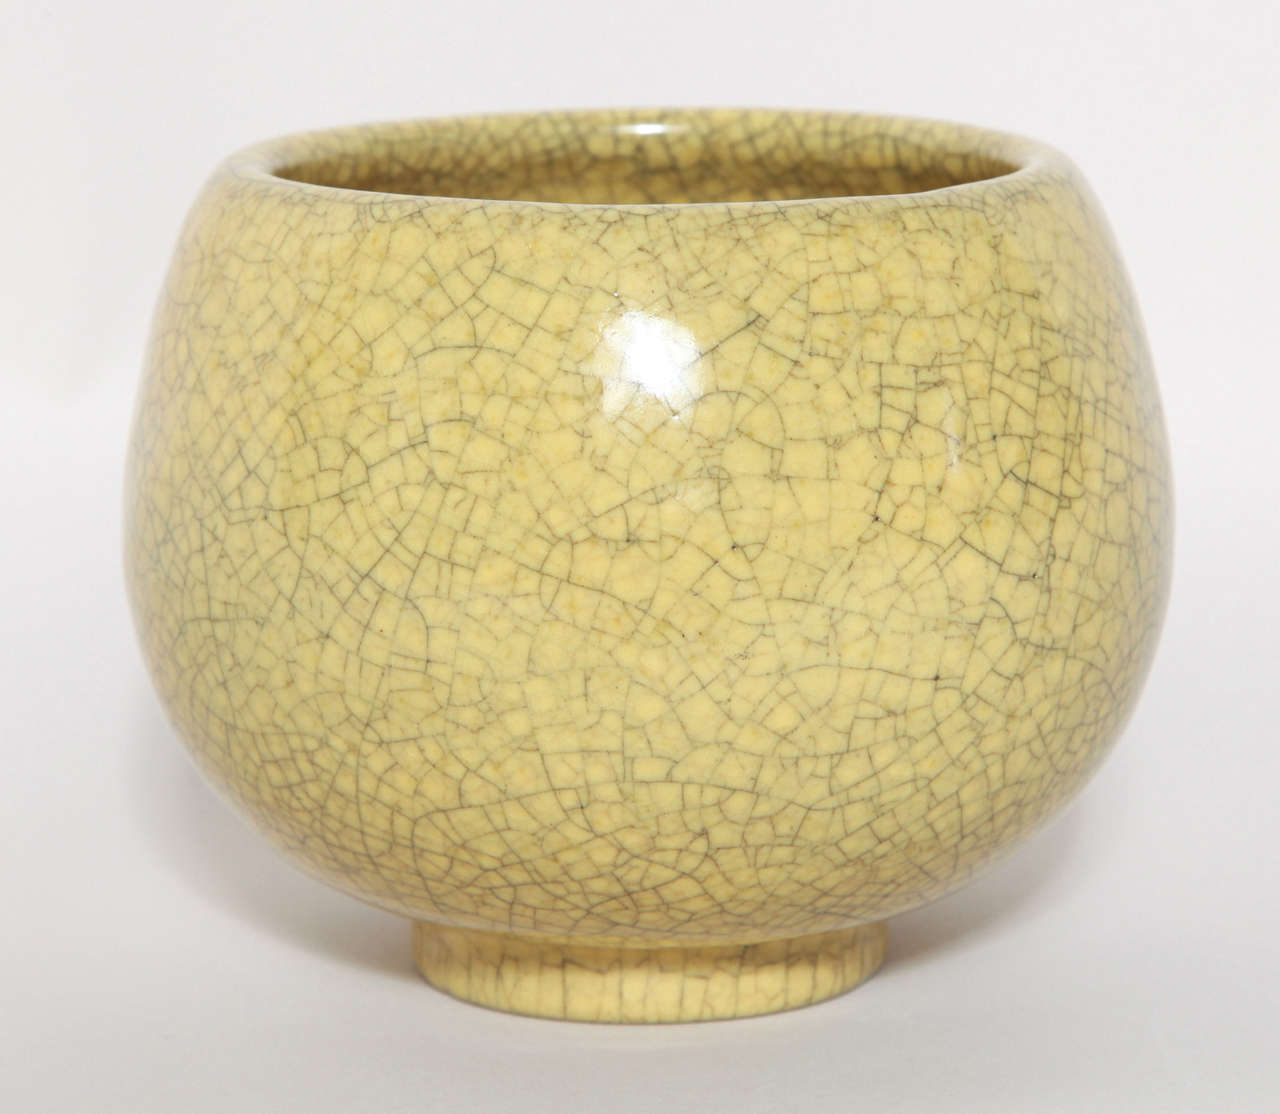 Small stoneware coupe with yellow craquele glaze.
Signed: ''H Sim'' incised

Henri Simmen studied pottery with Edmond Lachenal and established his studio in Meudon, a suburb of Paris. His early work, between 1910-1914, was inspired by the folk